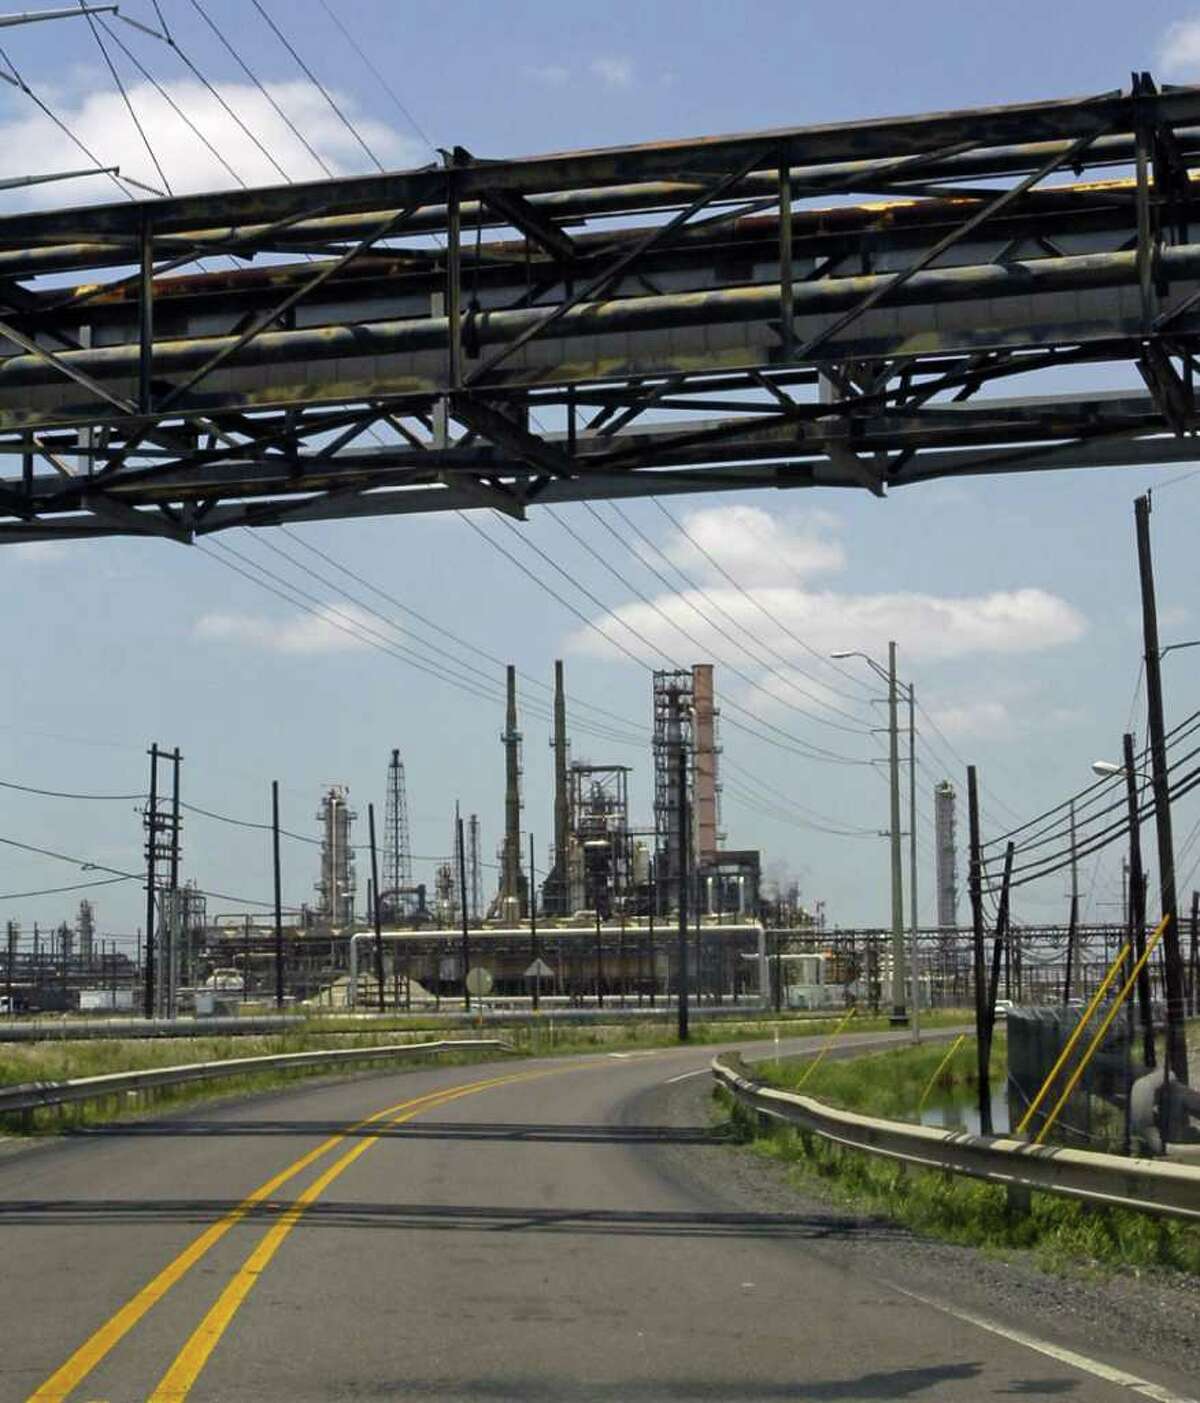 Valero Energy Corp. on Tuesday said it had recieved notice from the United Steelworkers, the union representing oil workers in a contract negotiation, that workers could go on strike. Enterprise file photo